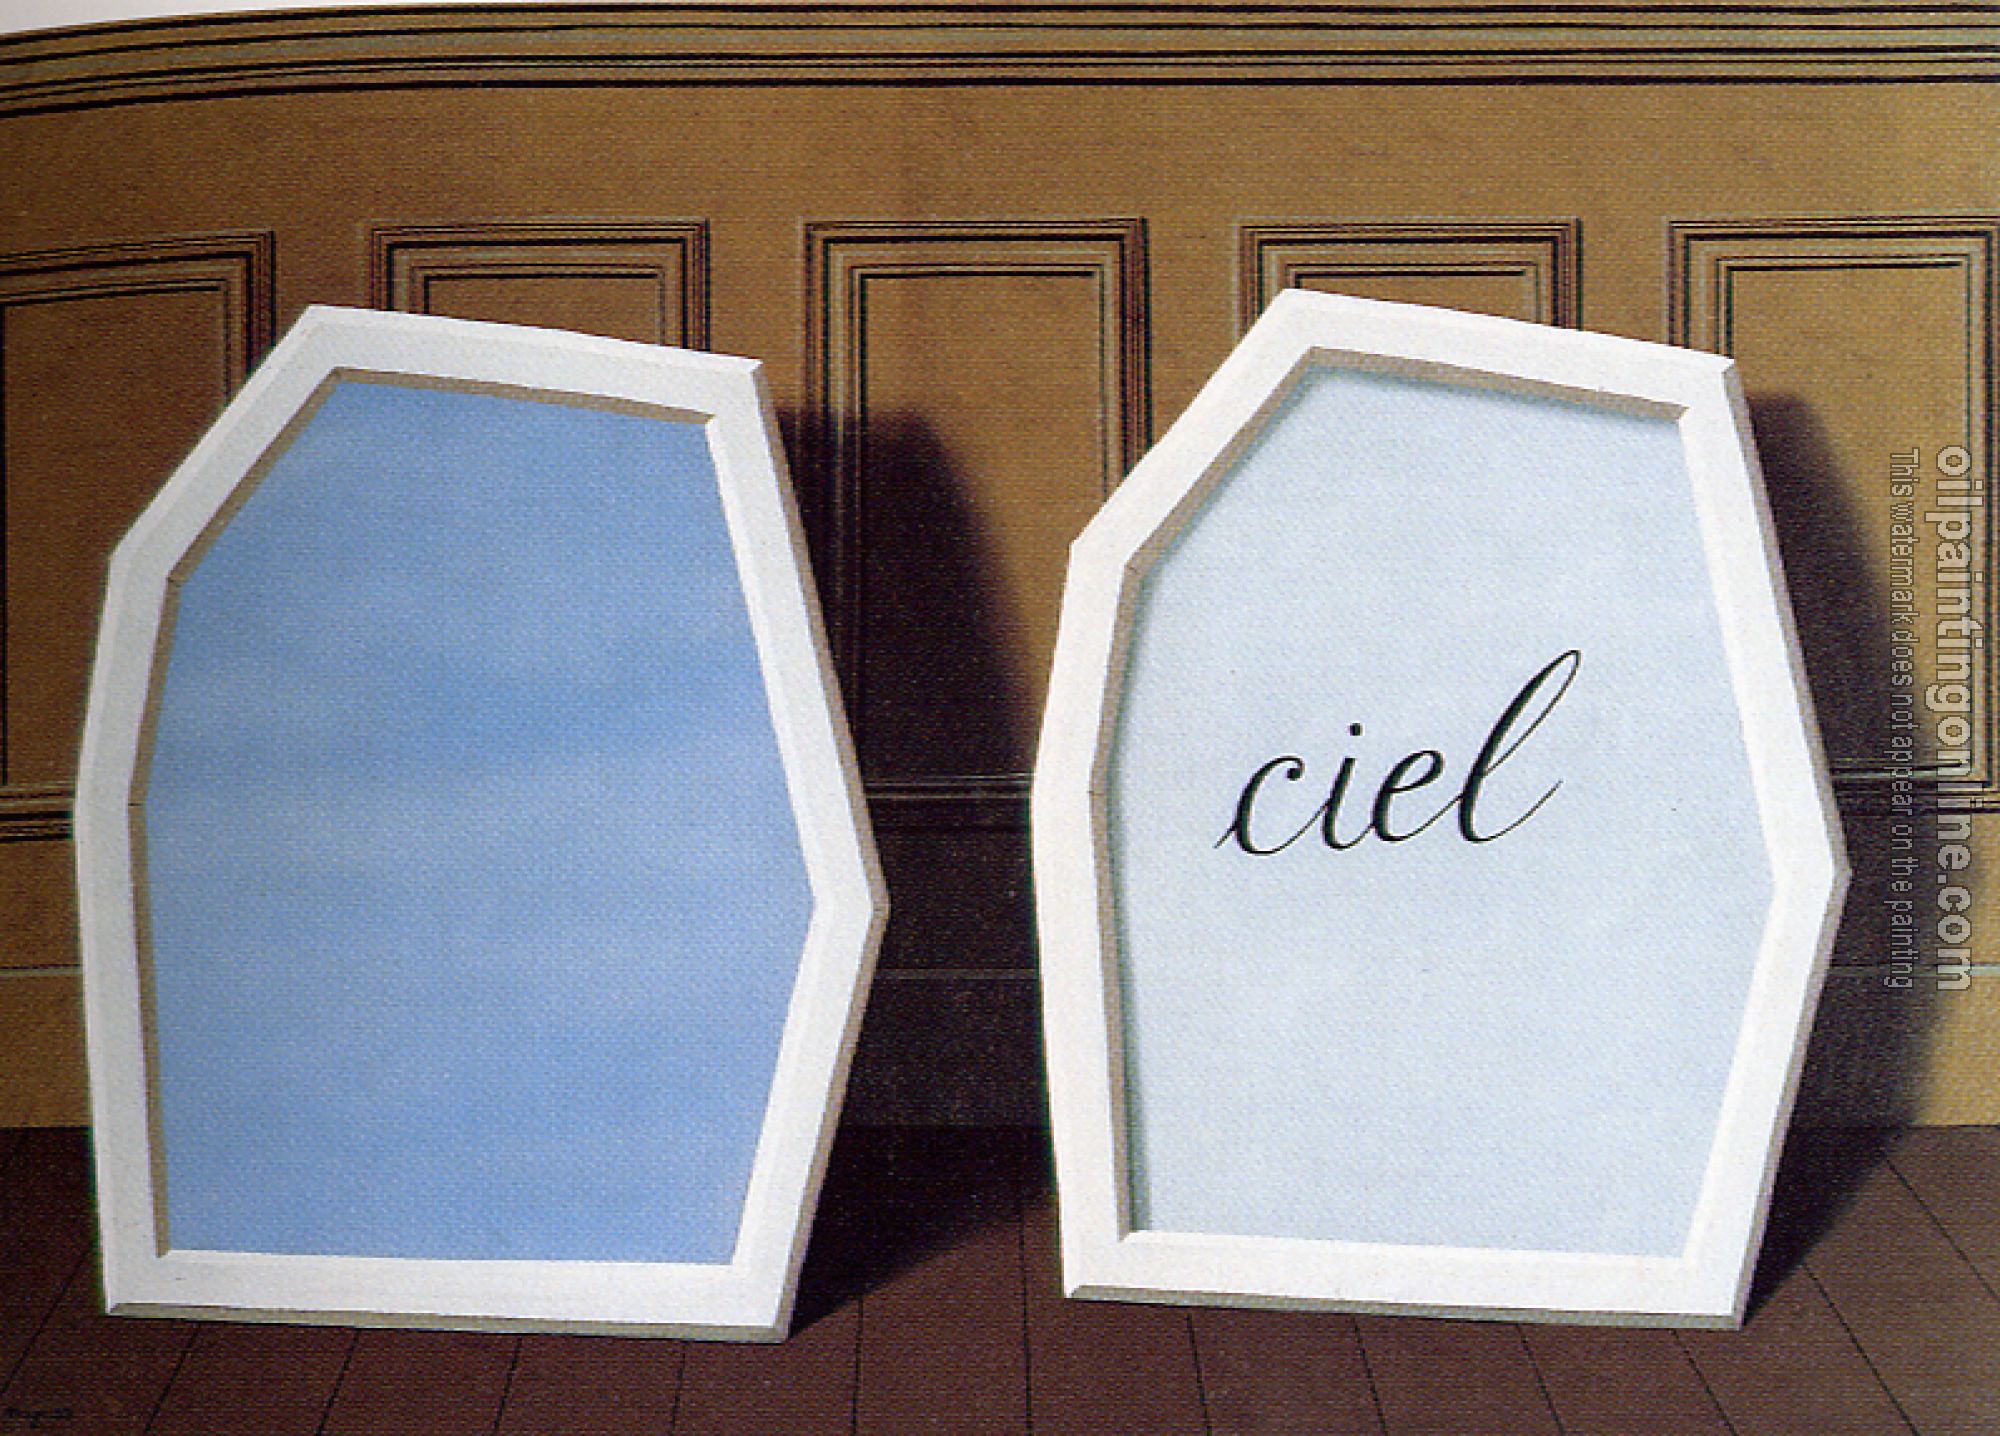 Magritte, Rene - the palace of curtains